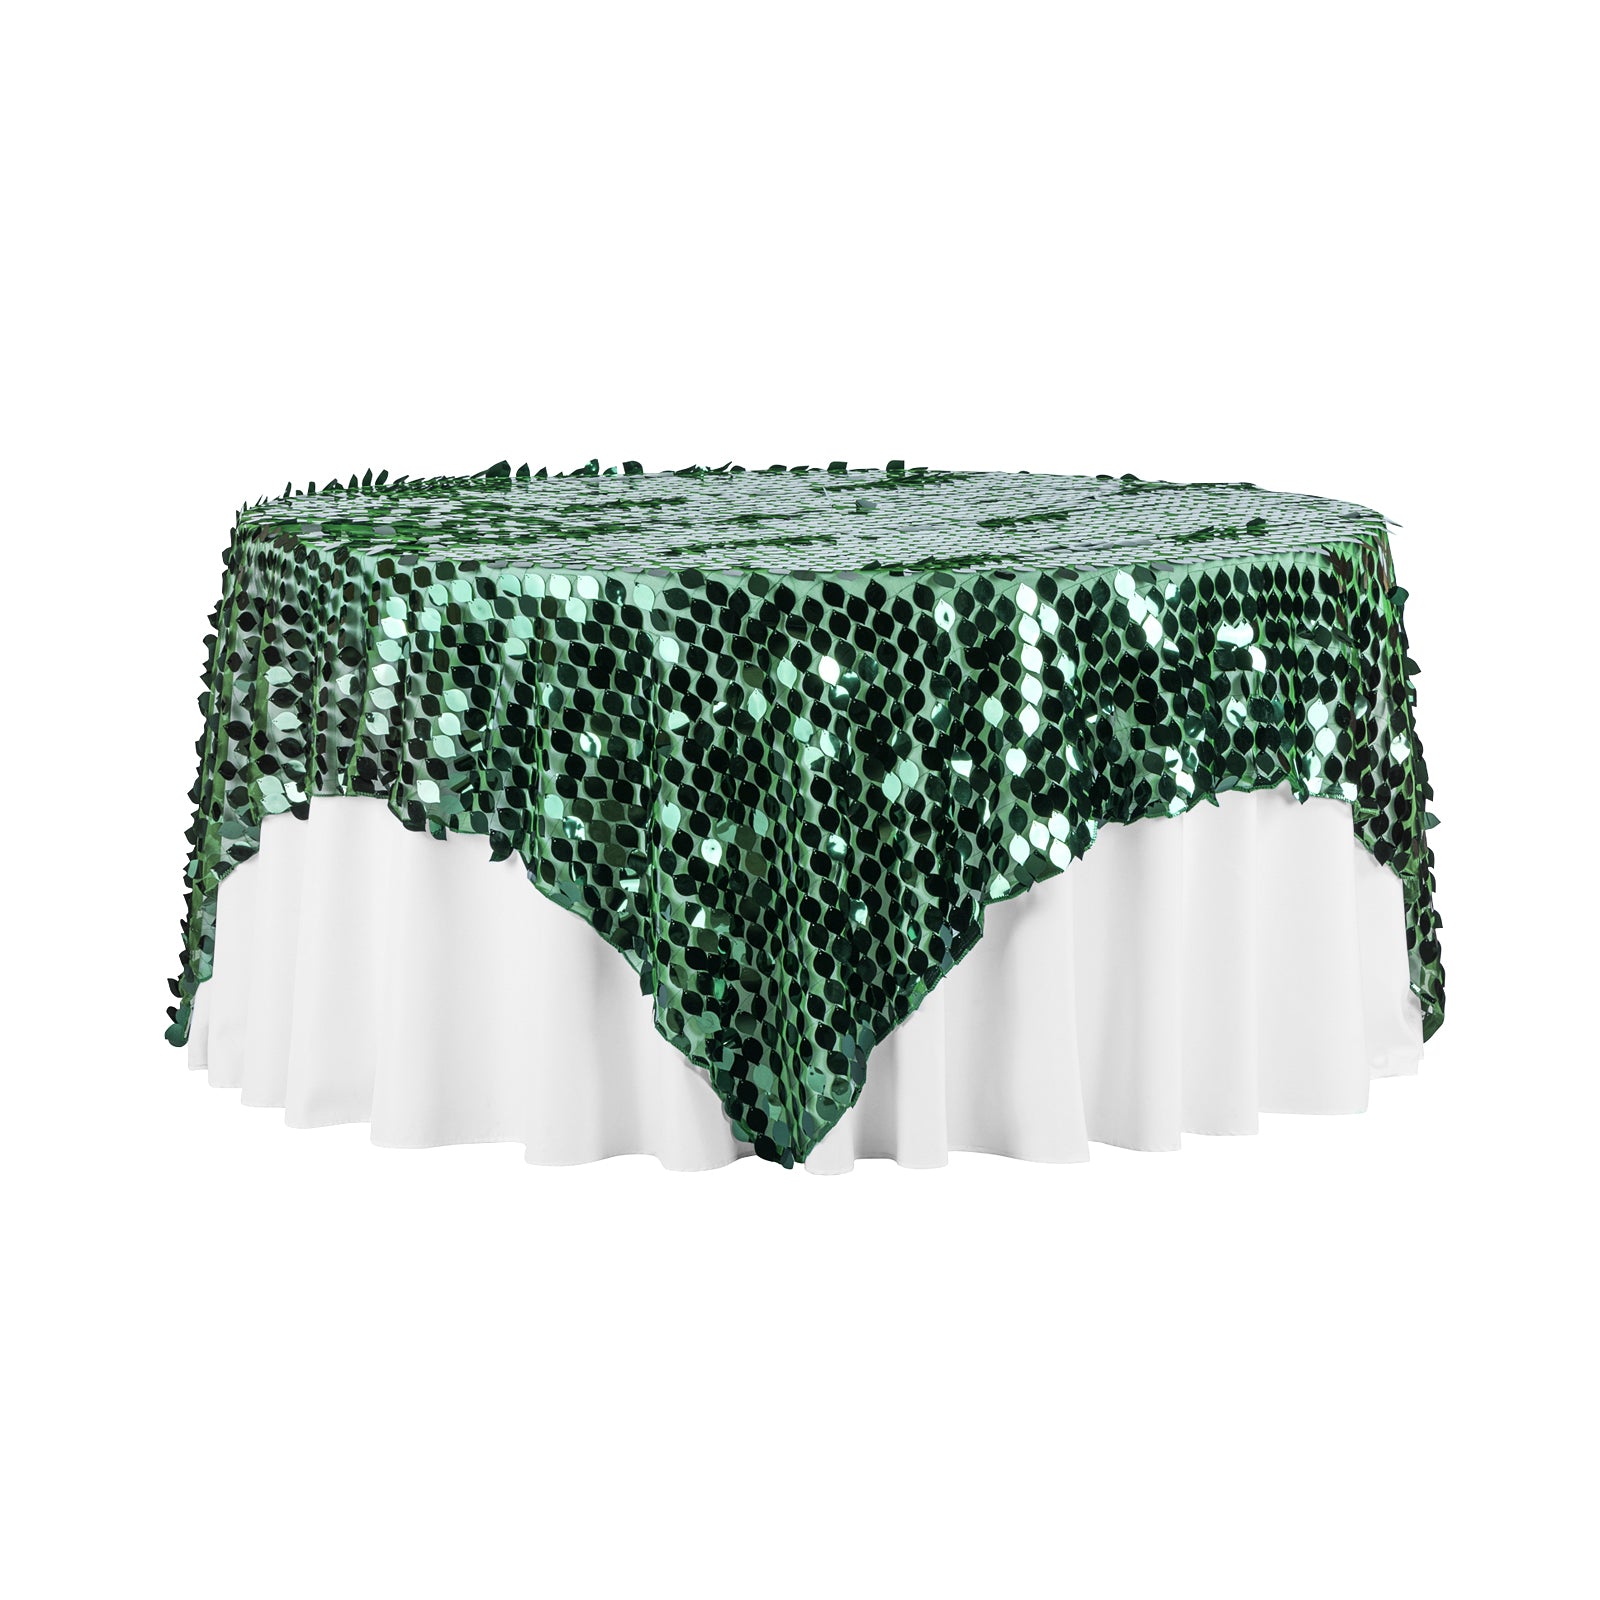 Leaf Payette Sequin Table Overlay Topper 90"x90" Square - Emerald Green - CV Linens